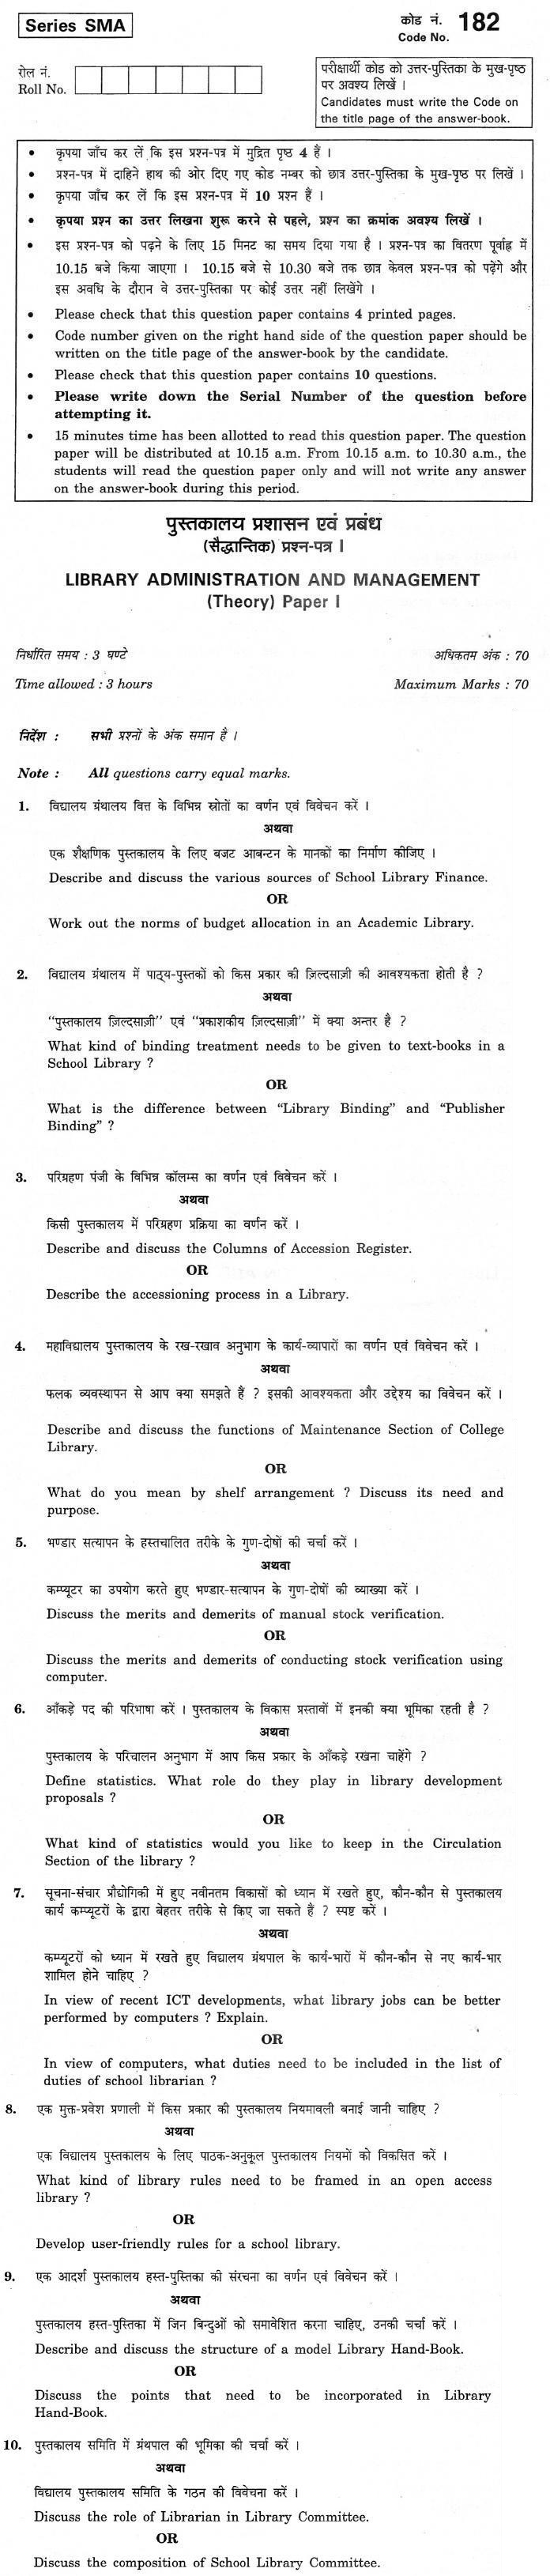 CBSE Class XII Previous Year Question Paper 2012 Library Administration and Management Paper I